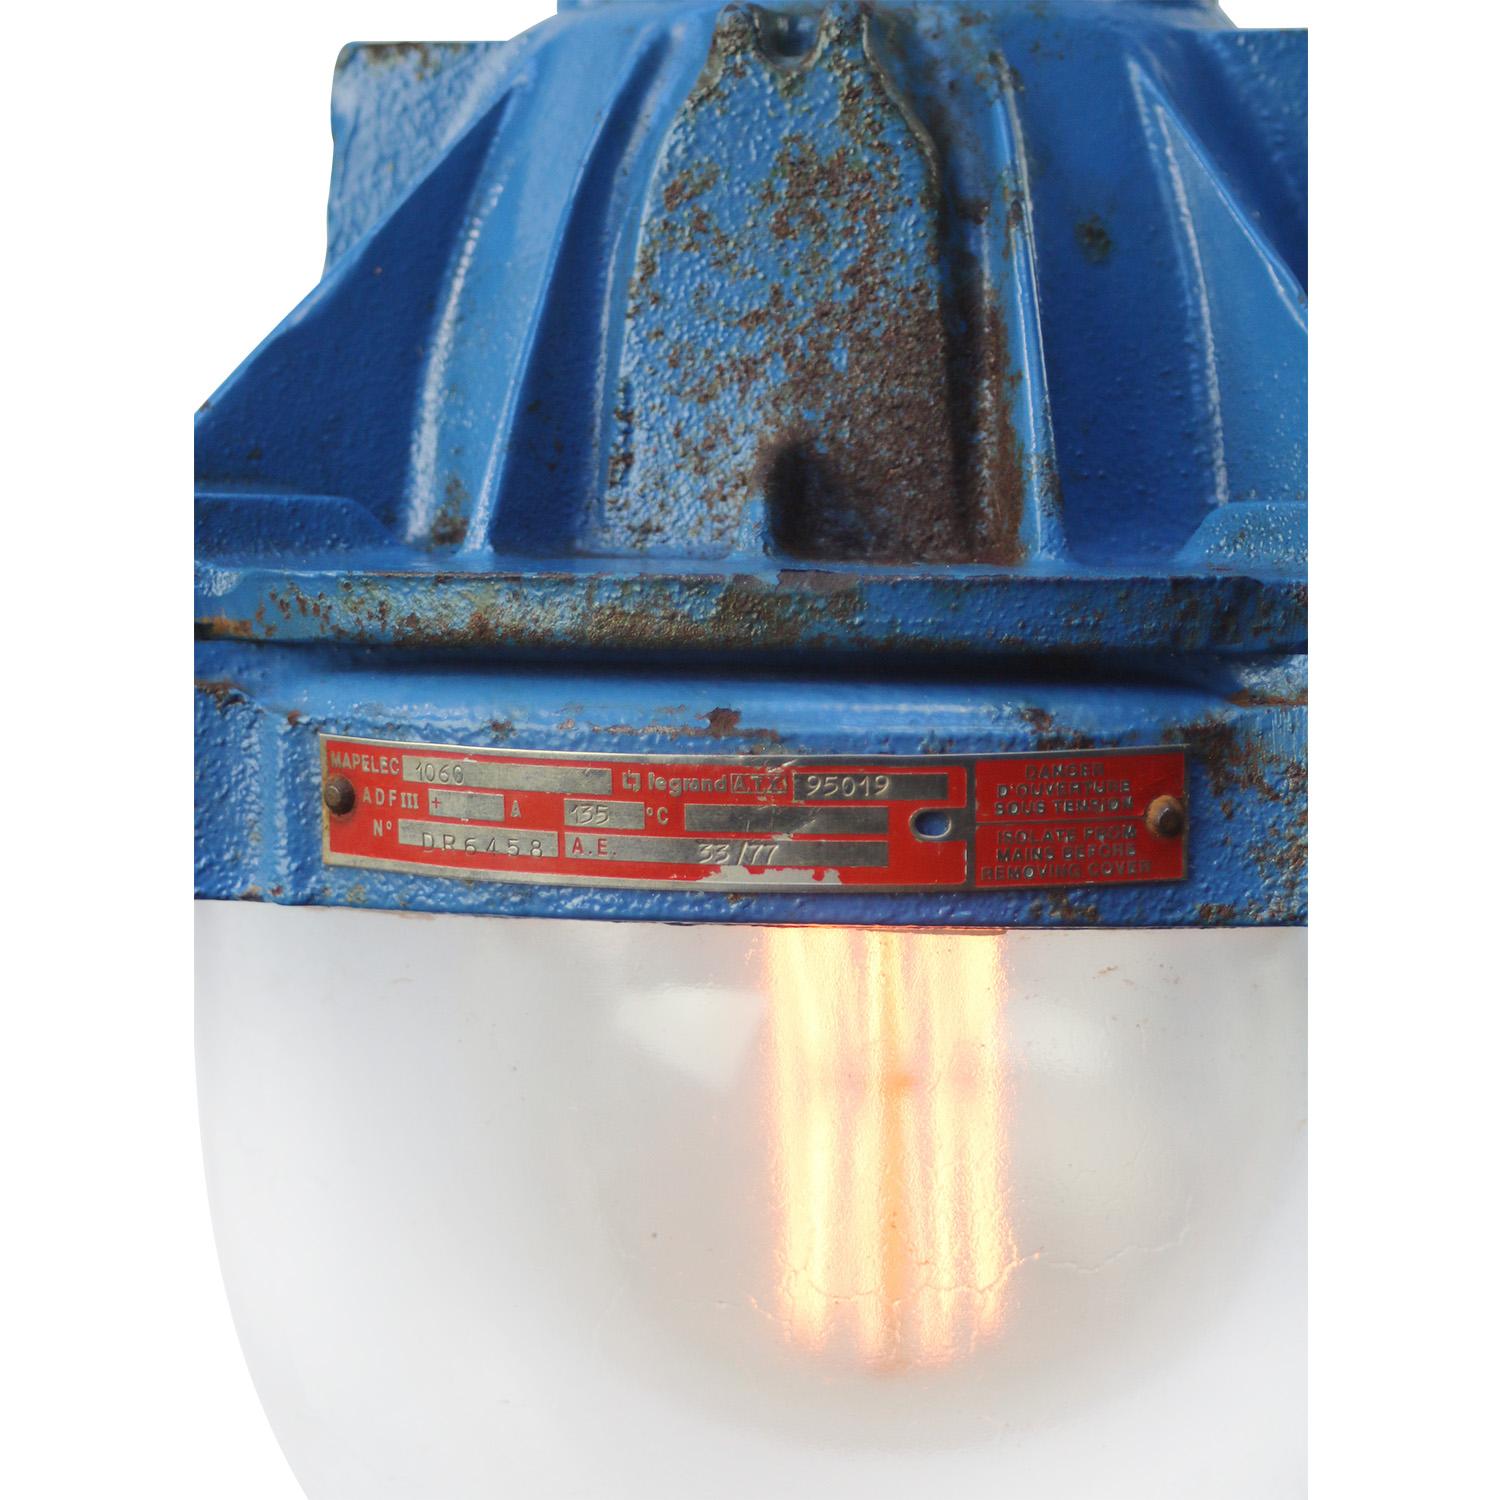 French industrial hanging lamp by Mapelec Amiens. 1977
Blue cast iron with clear glass

Heavy!

Weight: 13.80 kg / 30.4 lb

Priced per individual item. All lamps have been made suitable by international standards for incandescent light bulbs,